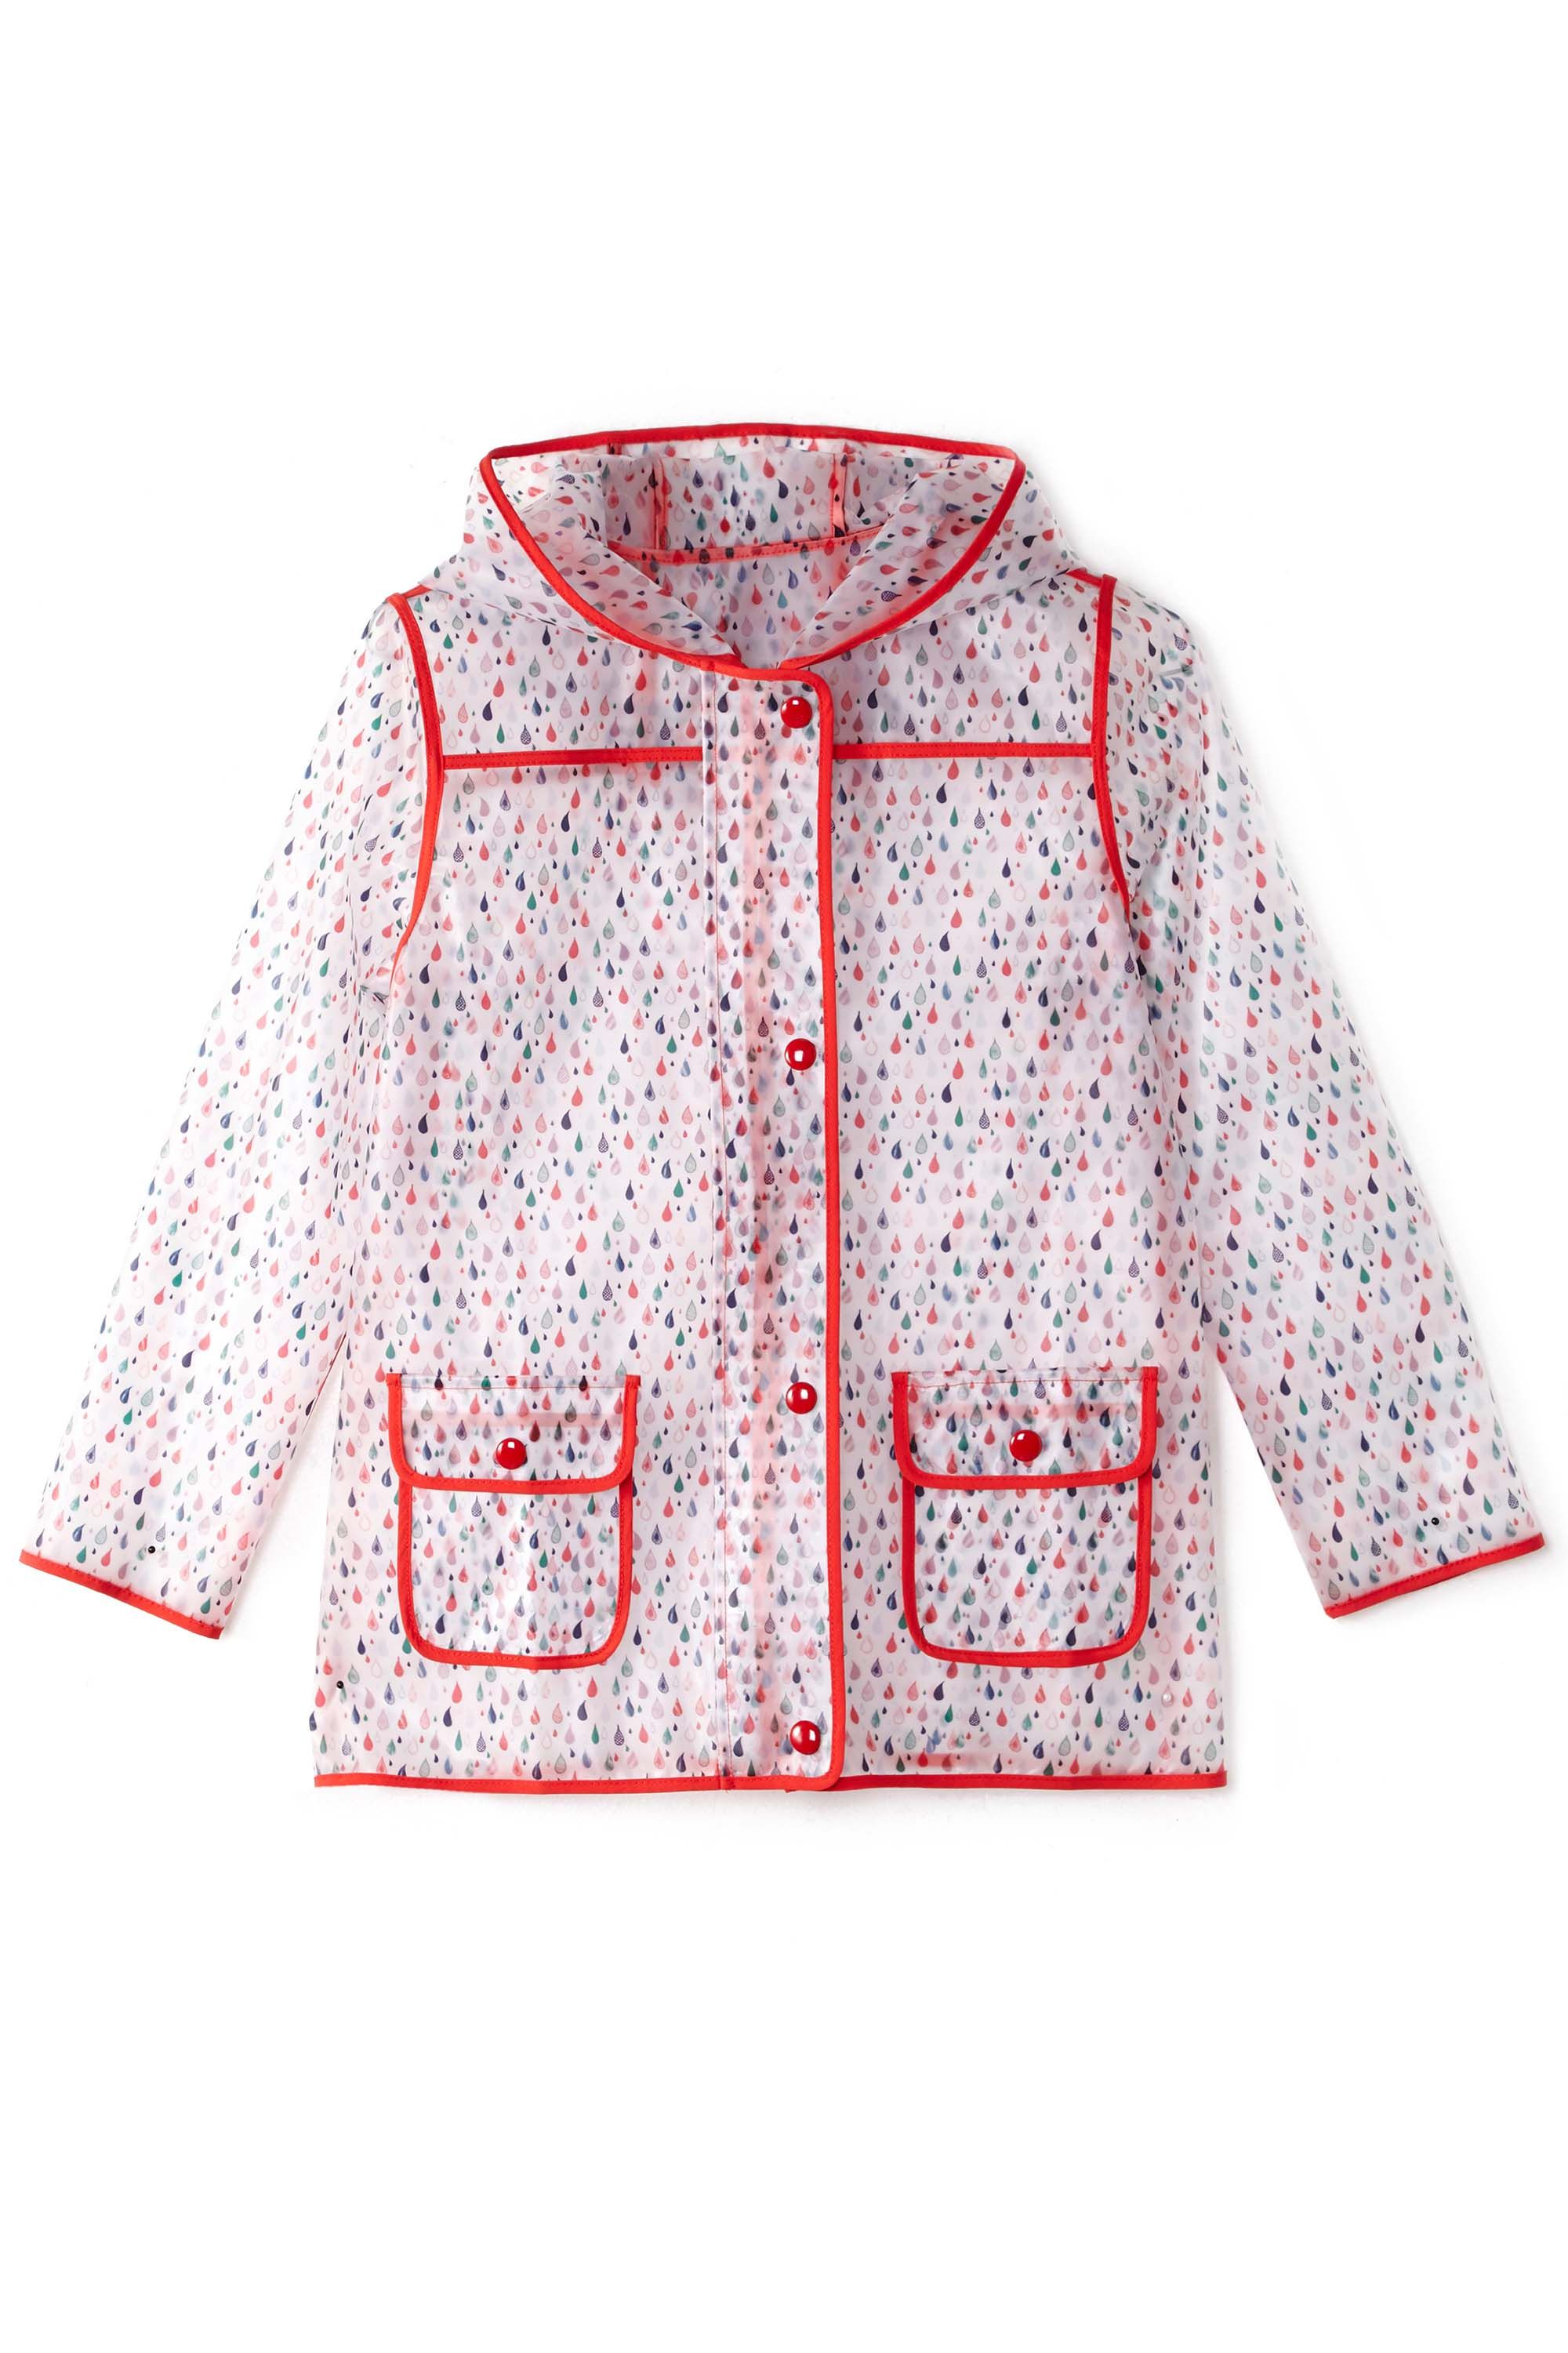 Brighten grey days by wrapping your little one in this Raindrop See Through Mac. Designed as part of our junior range, Yumi Girl, this transparent jacket is ideal for rainy days in the park. Boasting an array of raindrops all over with contrasting red piping, this children’s mac features a hood, snap button fastenings and front pockets. Layer this coat over a striped dress, tights and red wellington boots.  Shell: 100% Polyester, Trim: 95% Polyester 5% Elastane Sponge Clean With Cold Water Length is 60cm